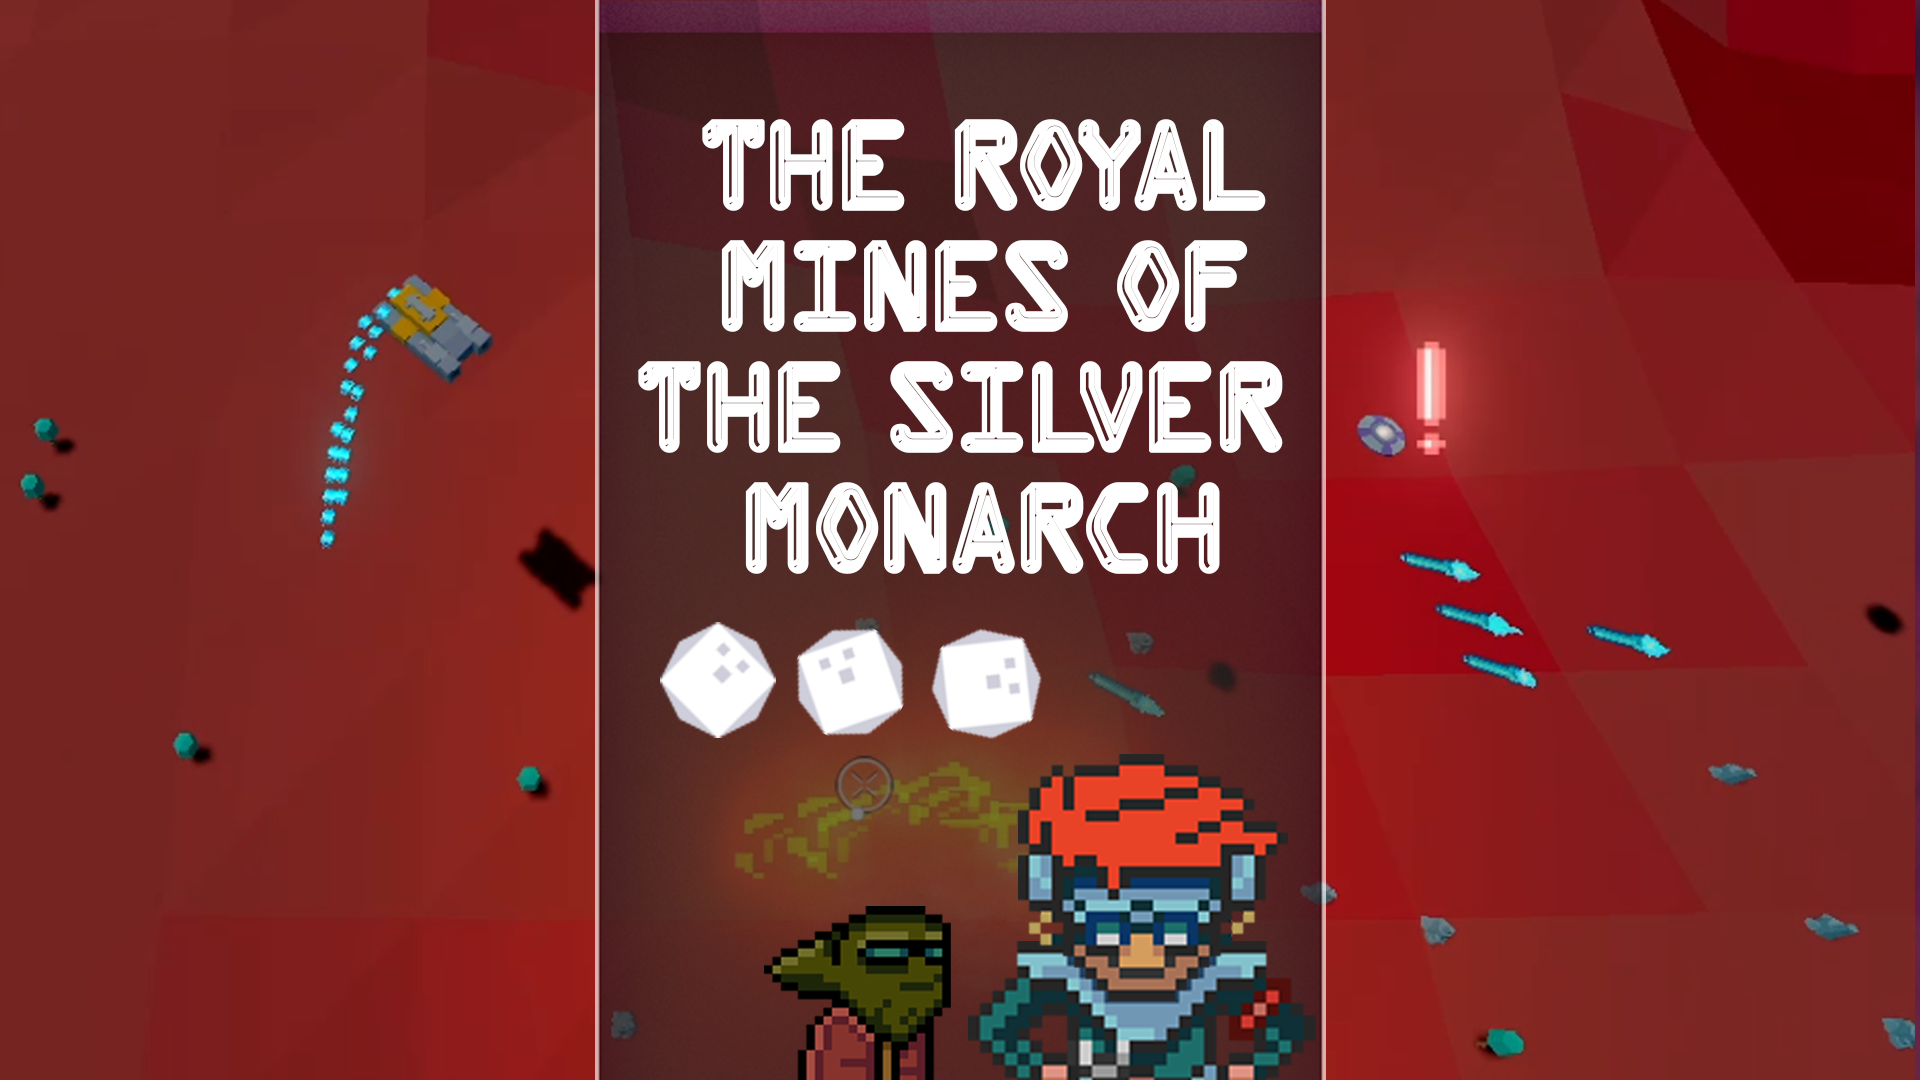 The Royal Mines of the Silver Monarch